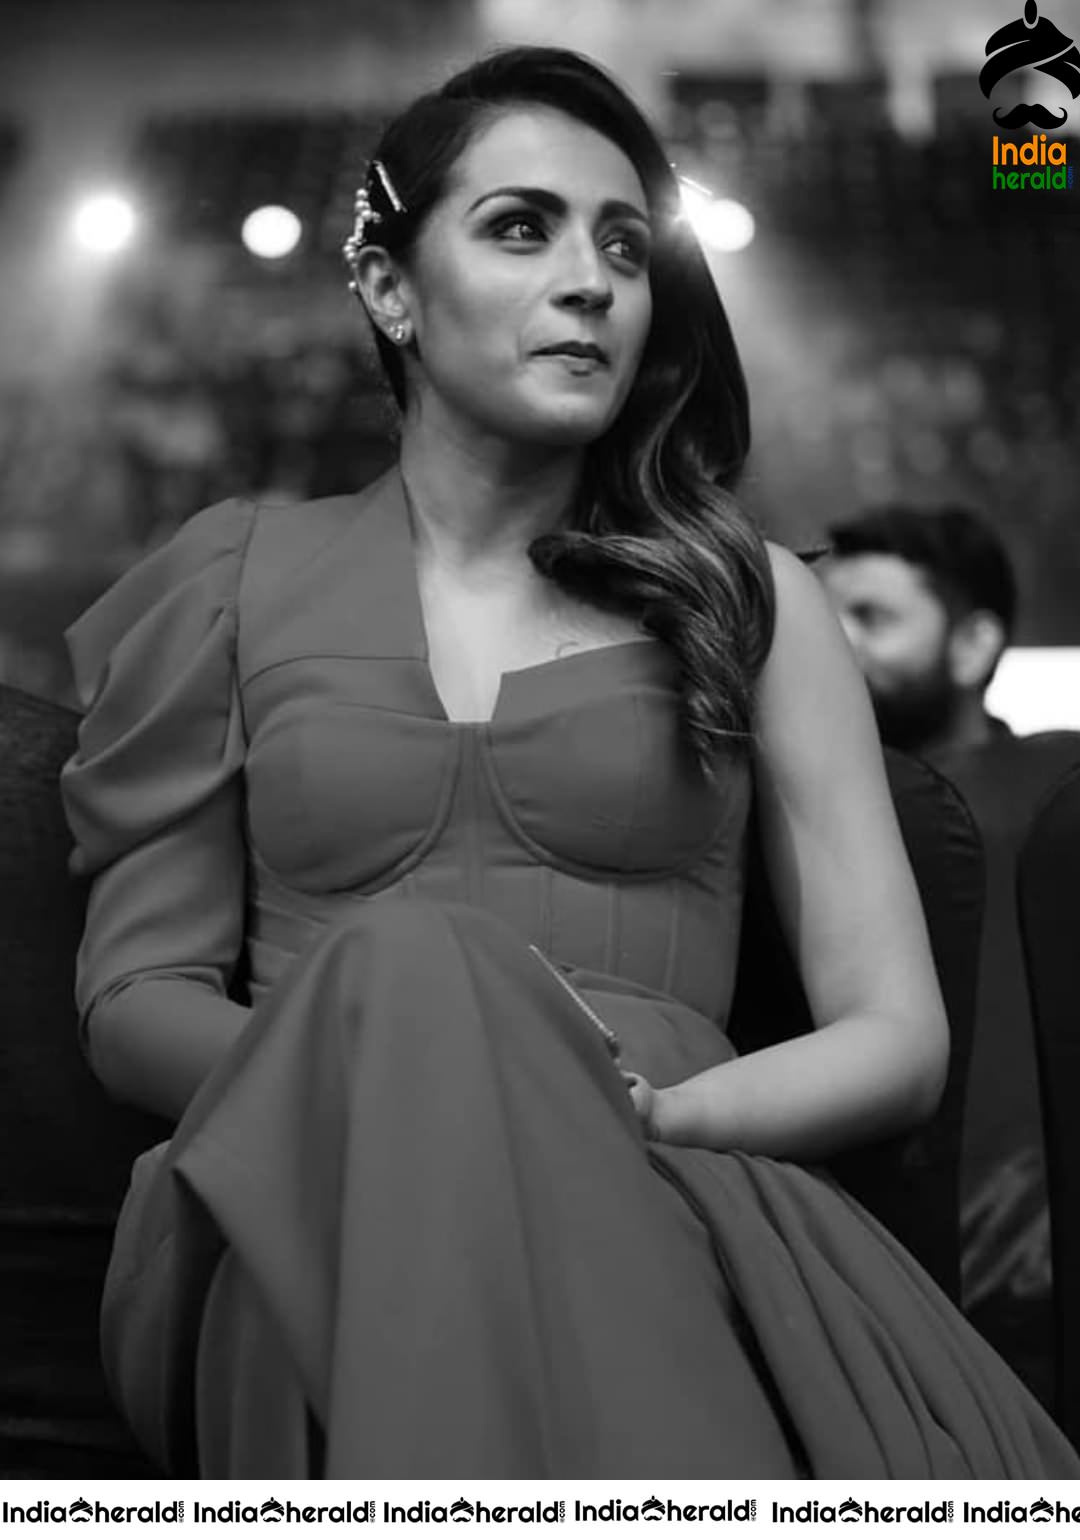 Few more clicks of the ever gorgeous Trisha from the recently held Filmfare Awards South event